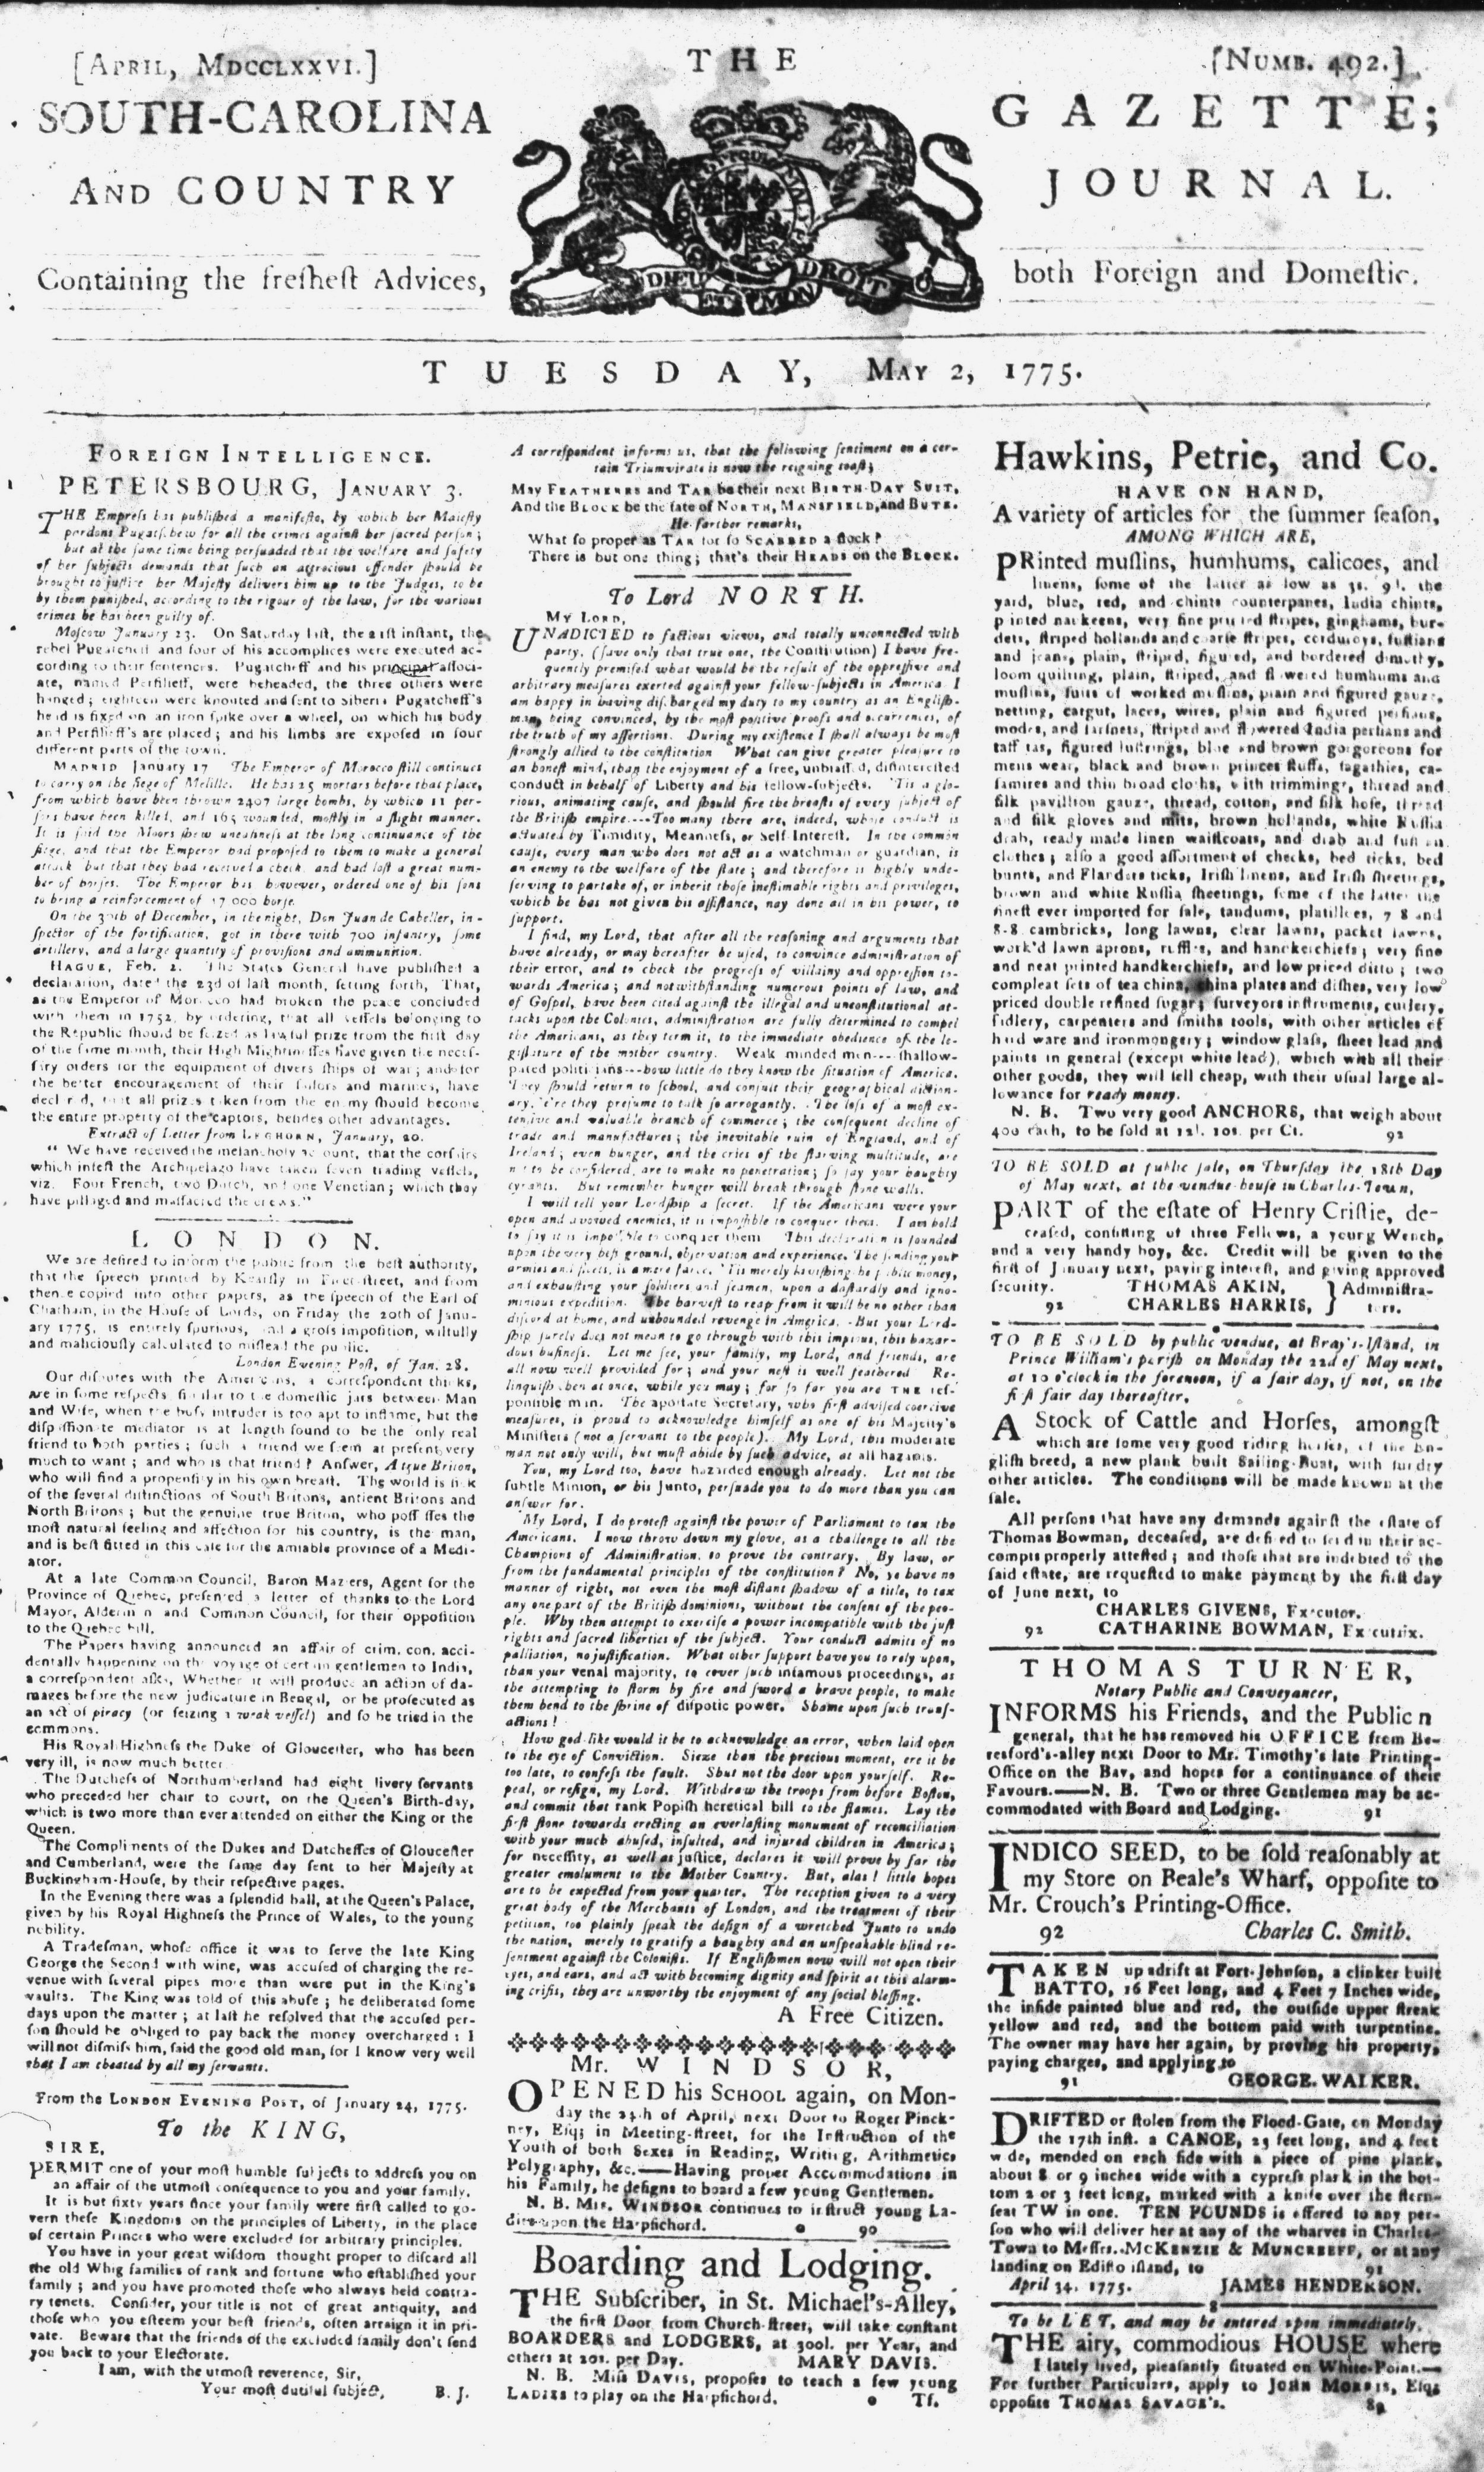 Accessible Archives/History Commons: Colonial Newspapers - Coherent  Digital, LLC